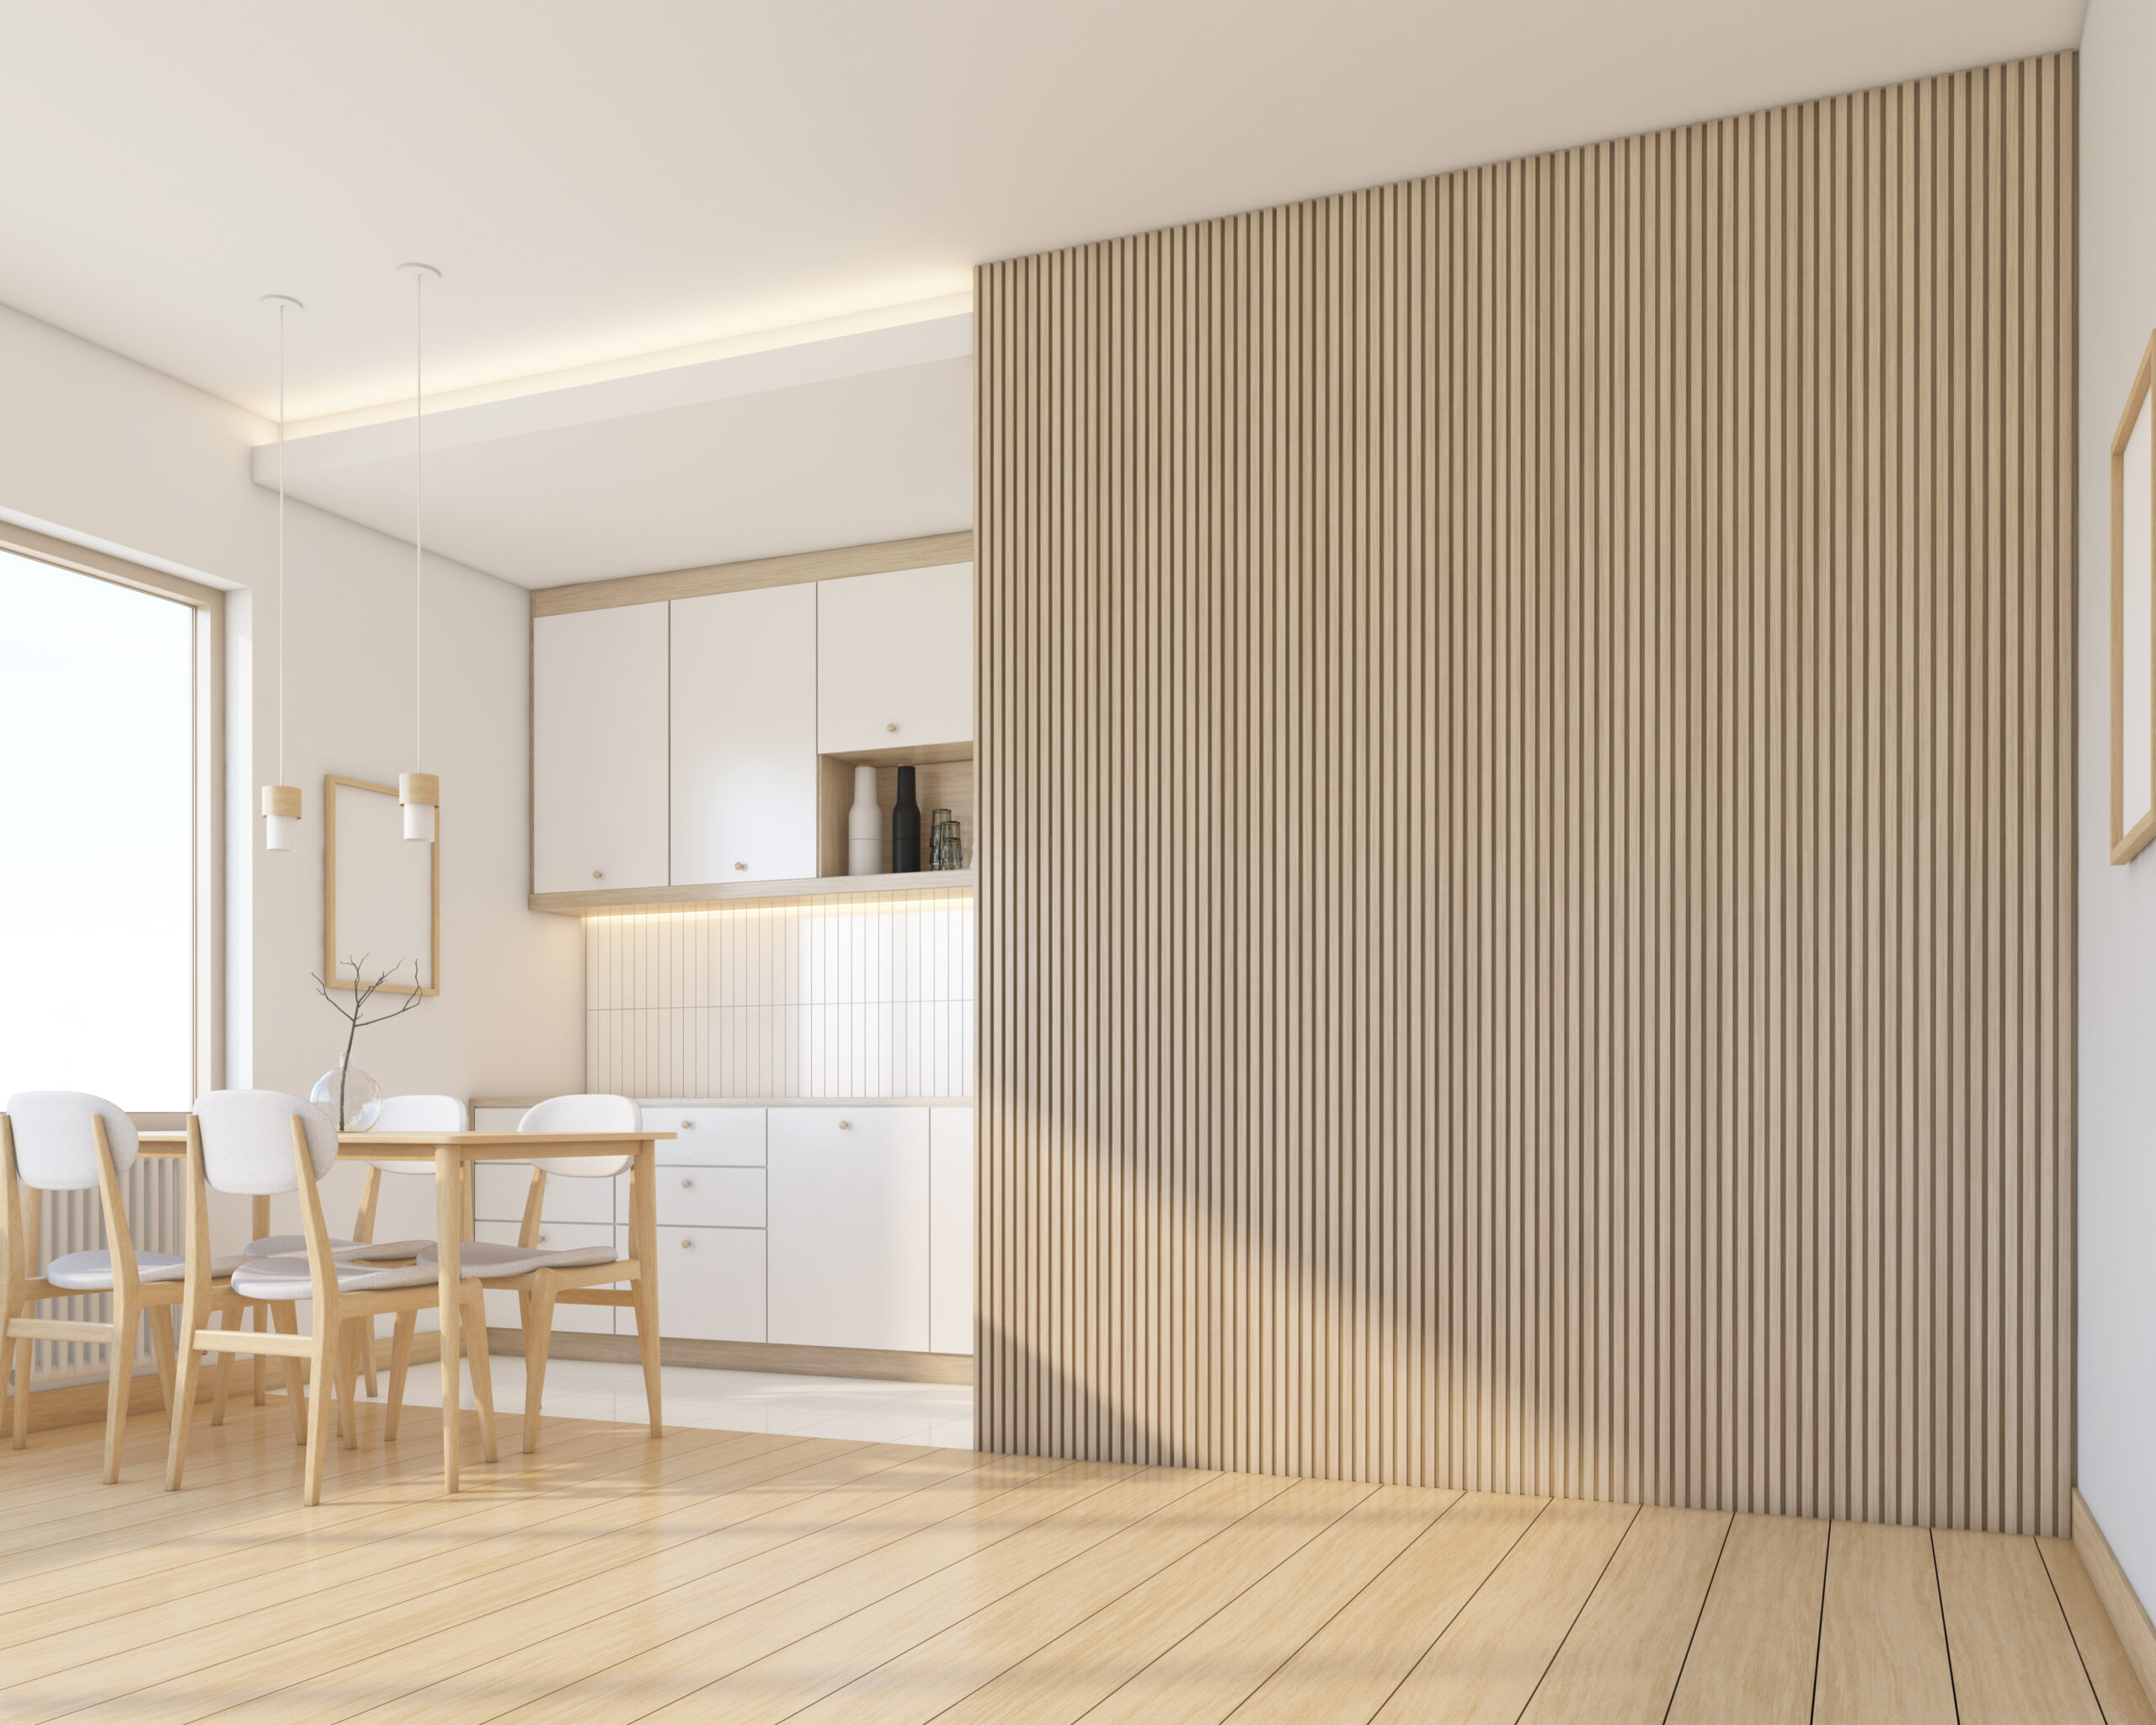 Modern japan style empty room decorated with minimalist kitchen